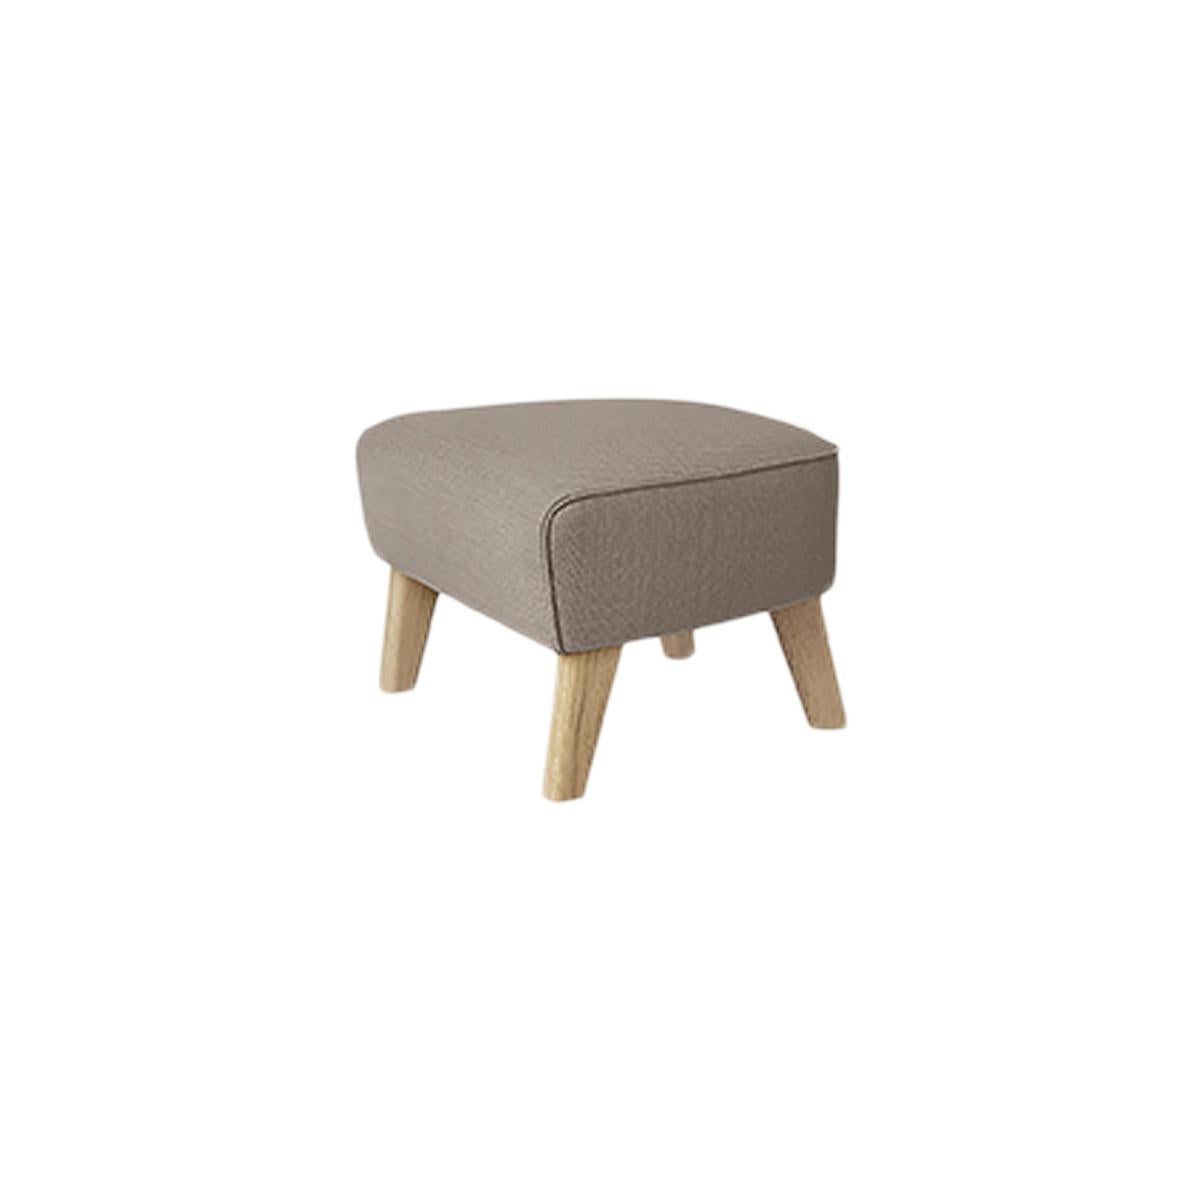 Light beige and natural oak raf simons vidar 3 my own chair footstool by Lassen.
Dimensions: W 56 x D 58 x H 40 cm 
Materials: Textile
Also available: Other colors available

The My Own Chair Footstool has been designed in the same spirit as